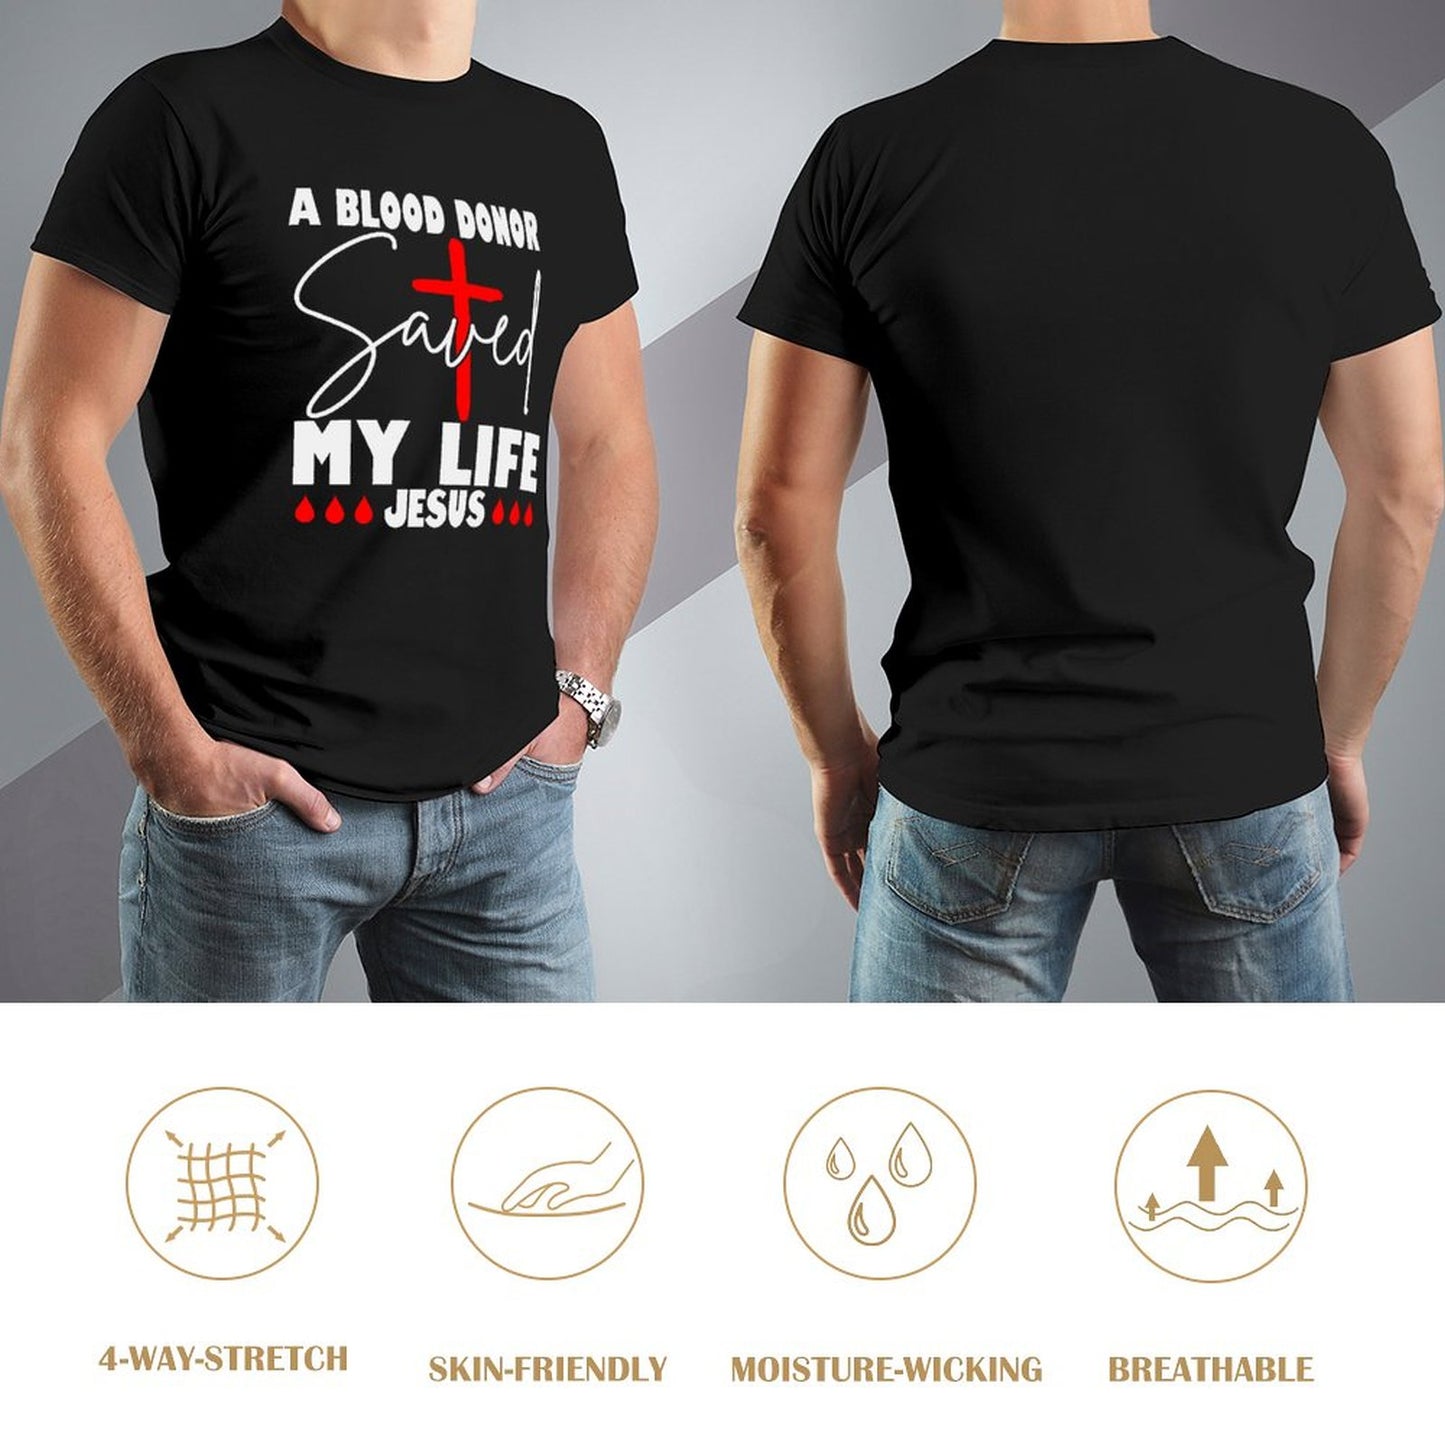 A Blood Donor Saved My Life Jesus Men's Christian T-shirt SALE-Personal Design